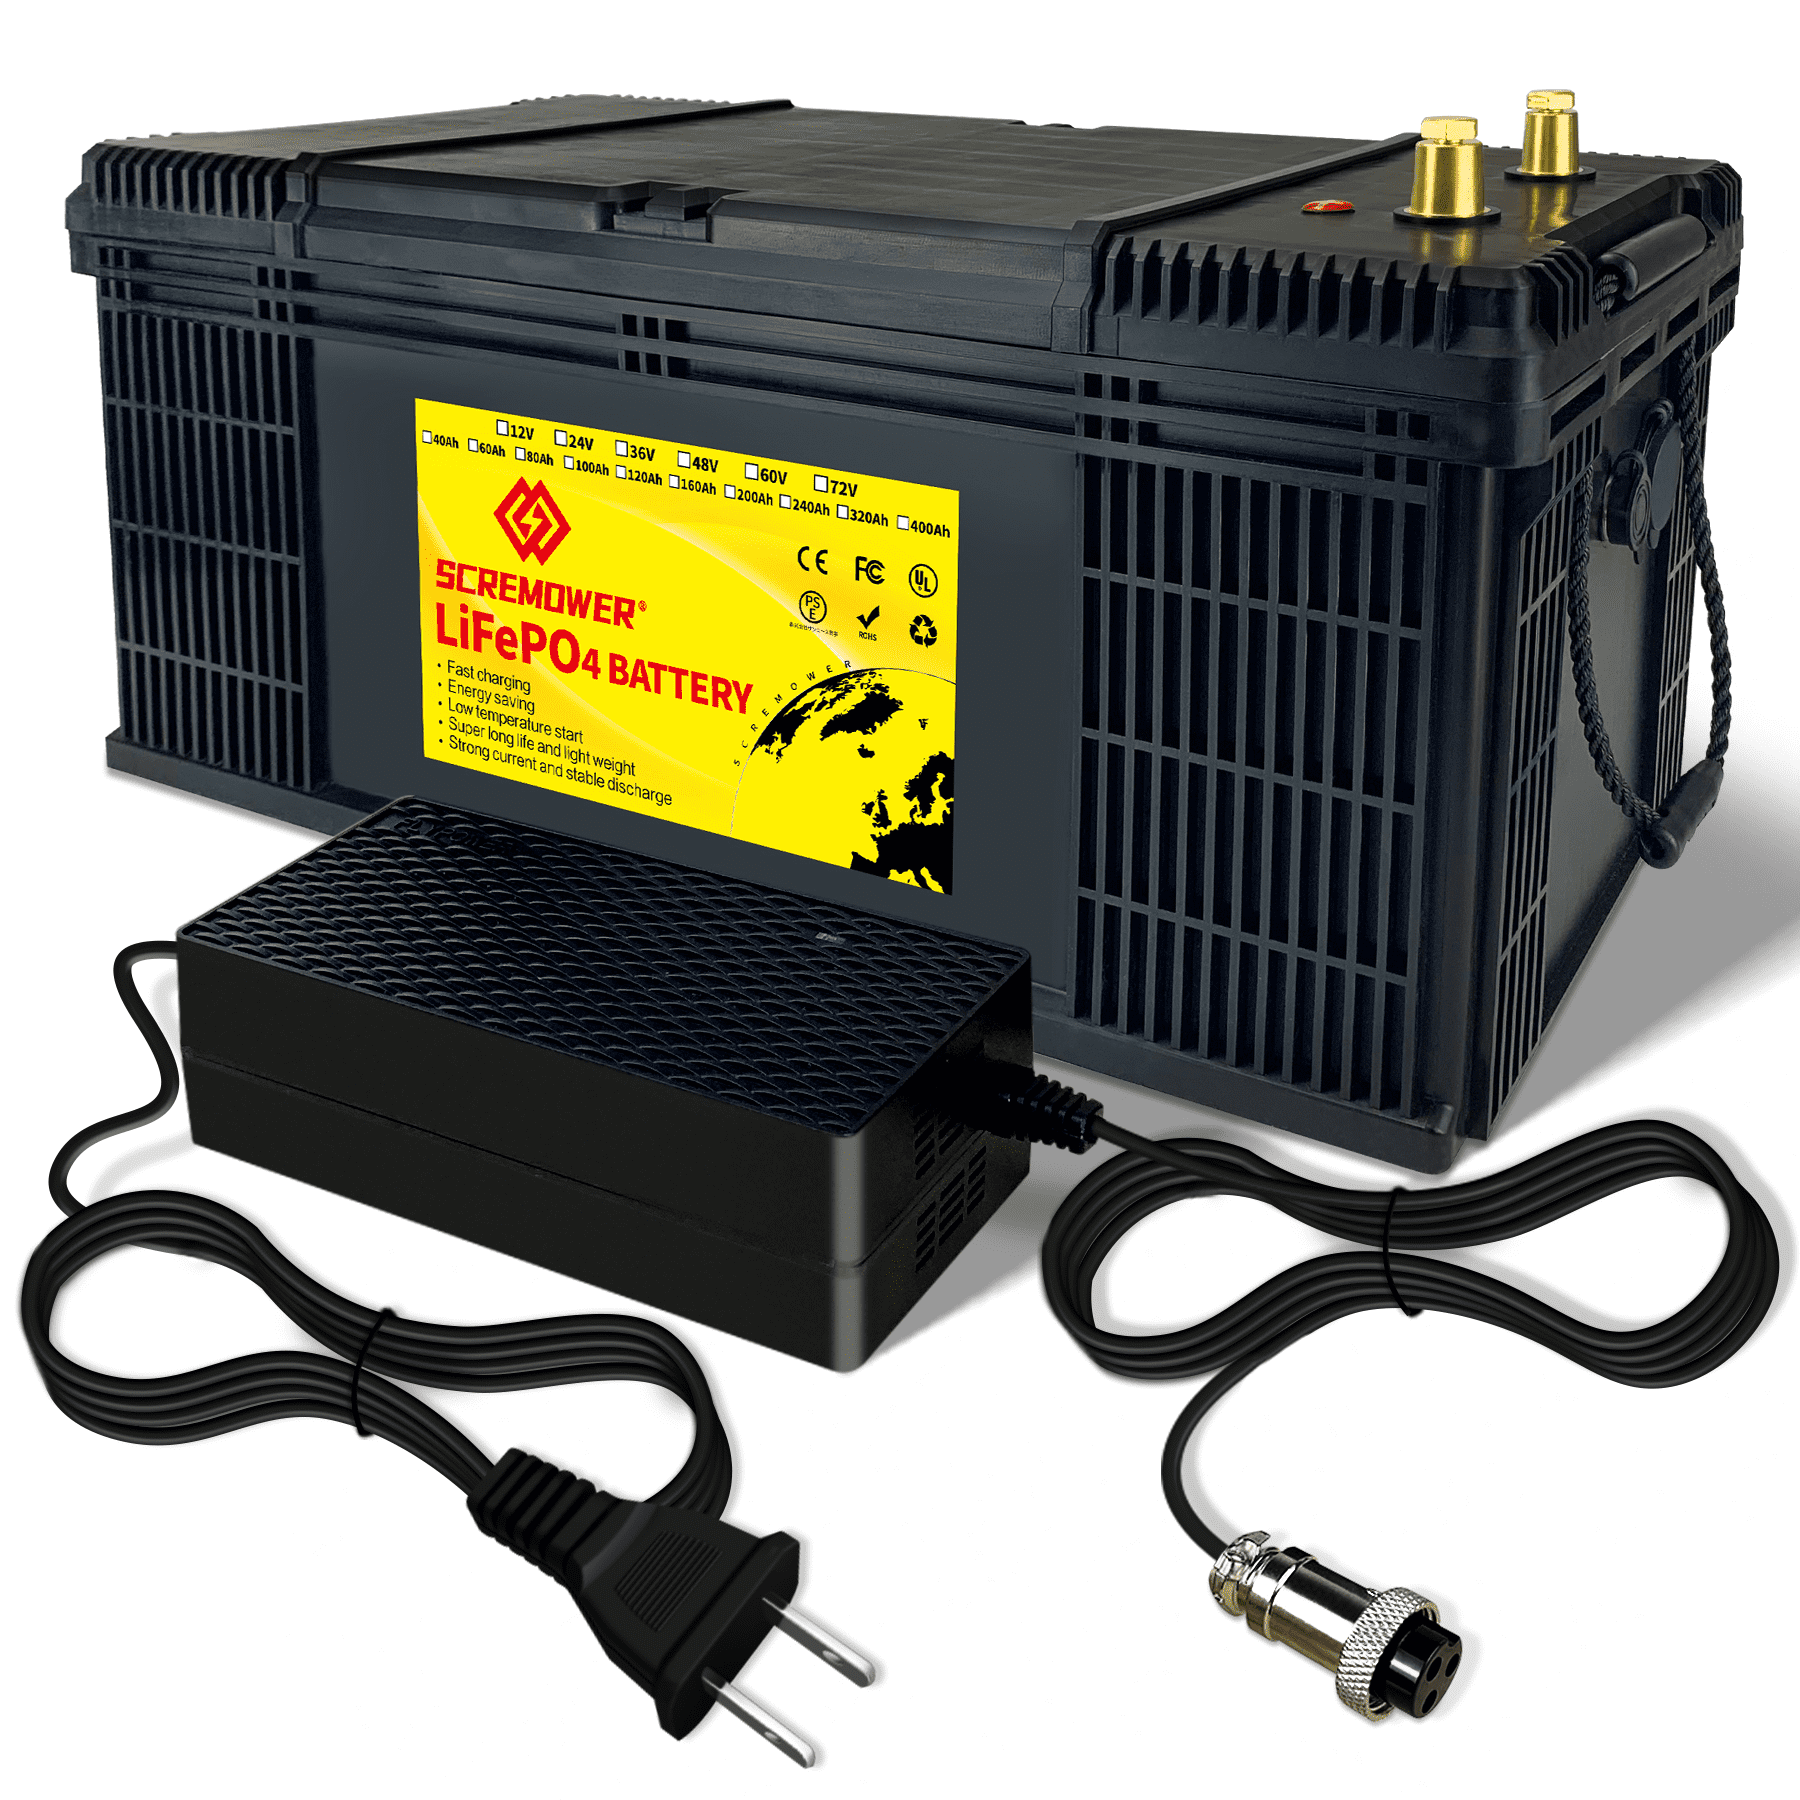 LiTime 12V 100Ah LiFePO4 Battery BCI Group 31 Lithium Battery Built-in 100A  BMS, Up to 15000 Deep Cycles, Perfect for RV, Marine, Home Energy Storage